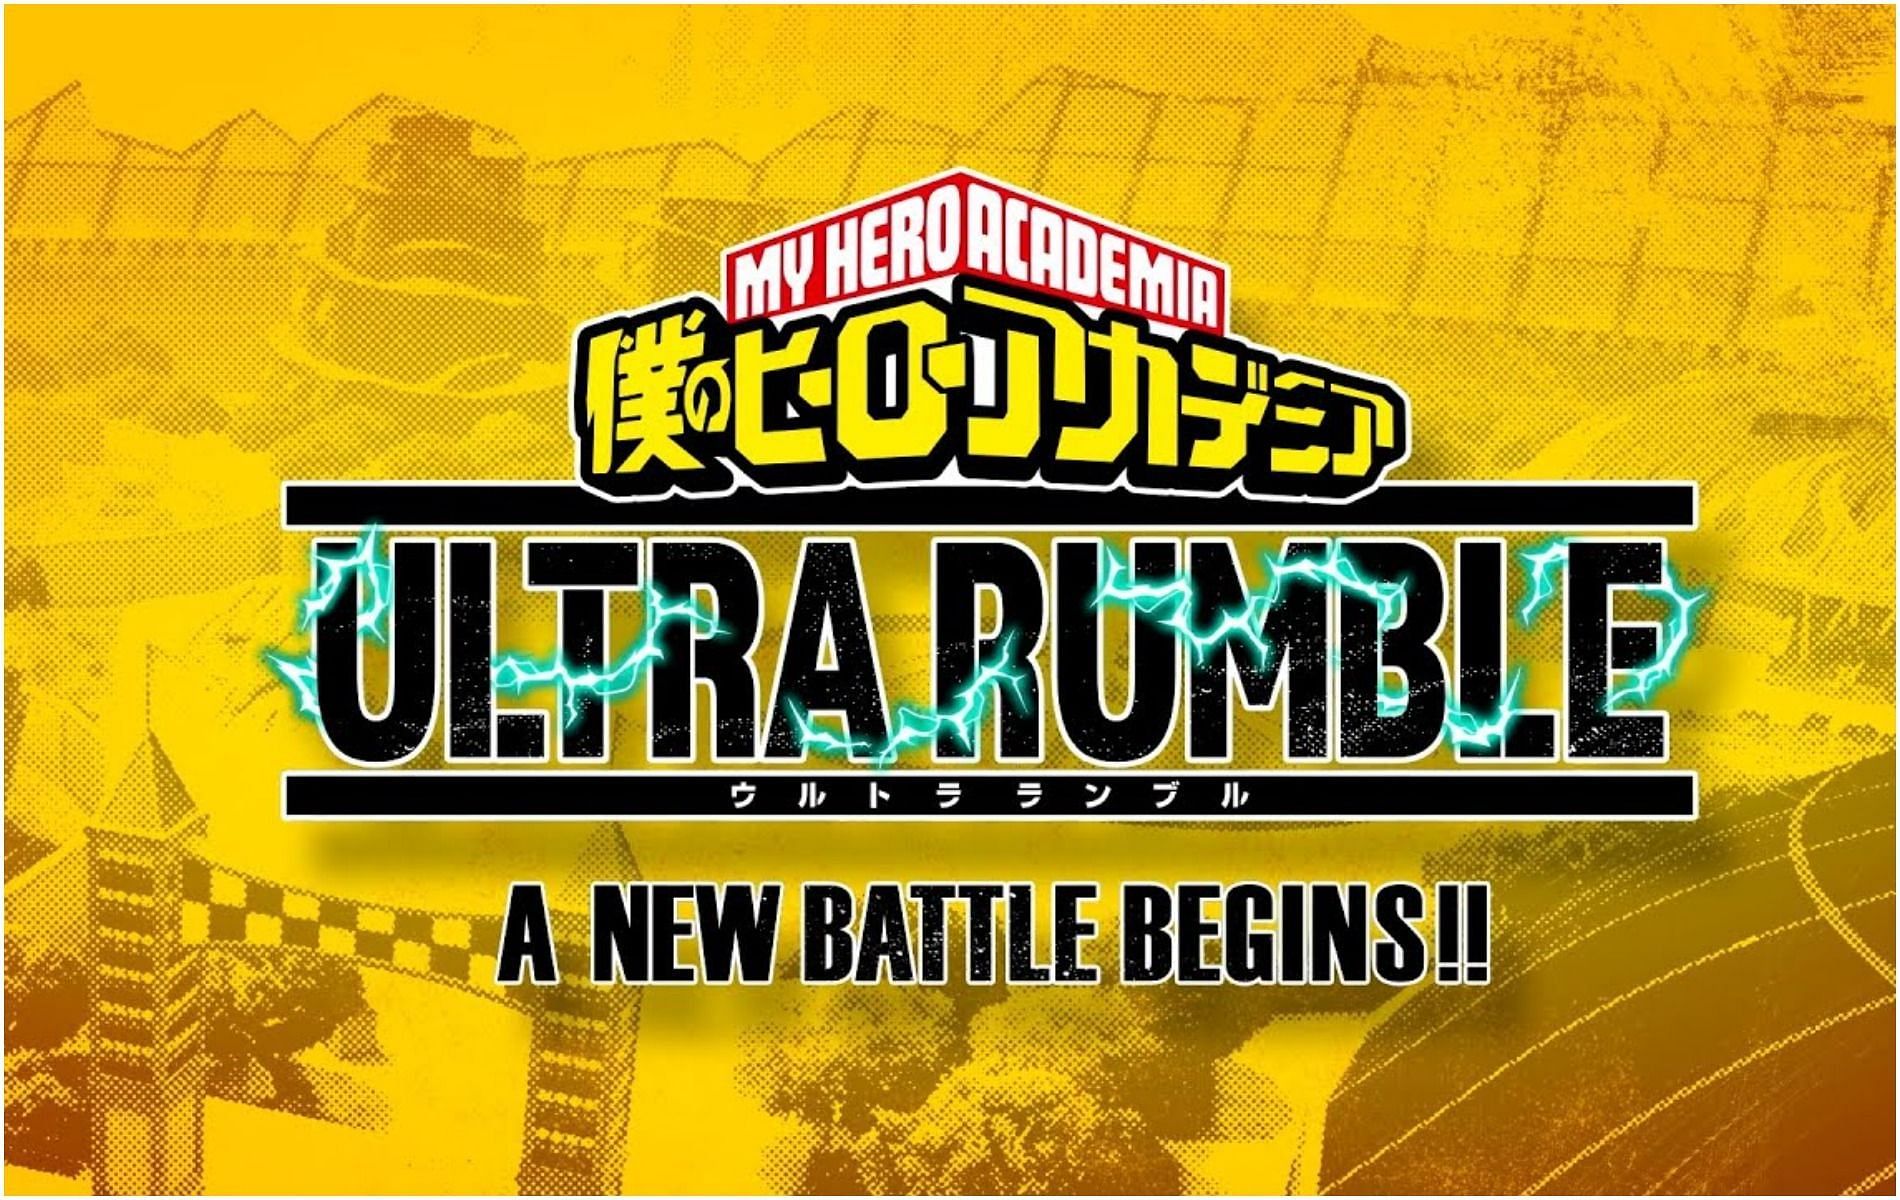 My Hero Academia Ultra Rumble Trailer Shows Off the Battle Royale